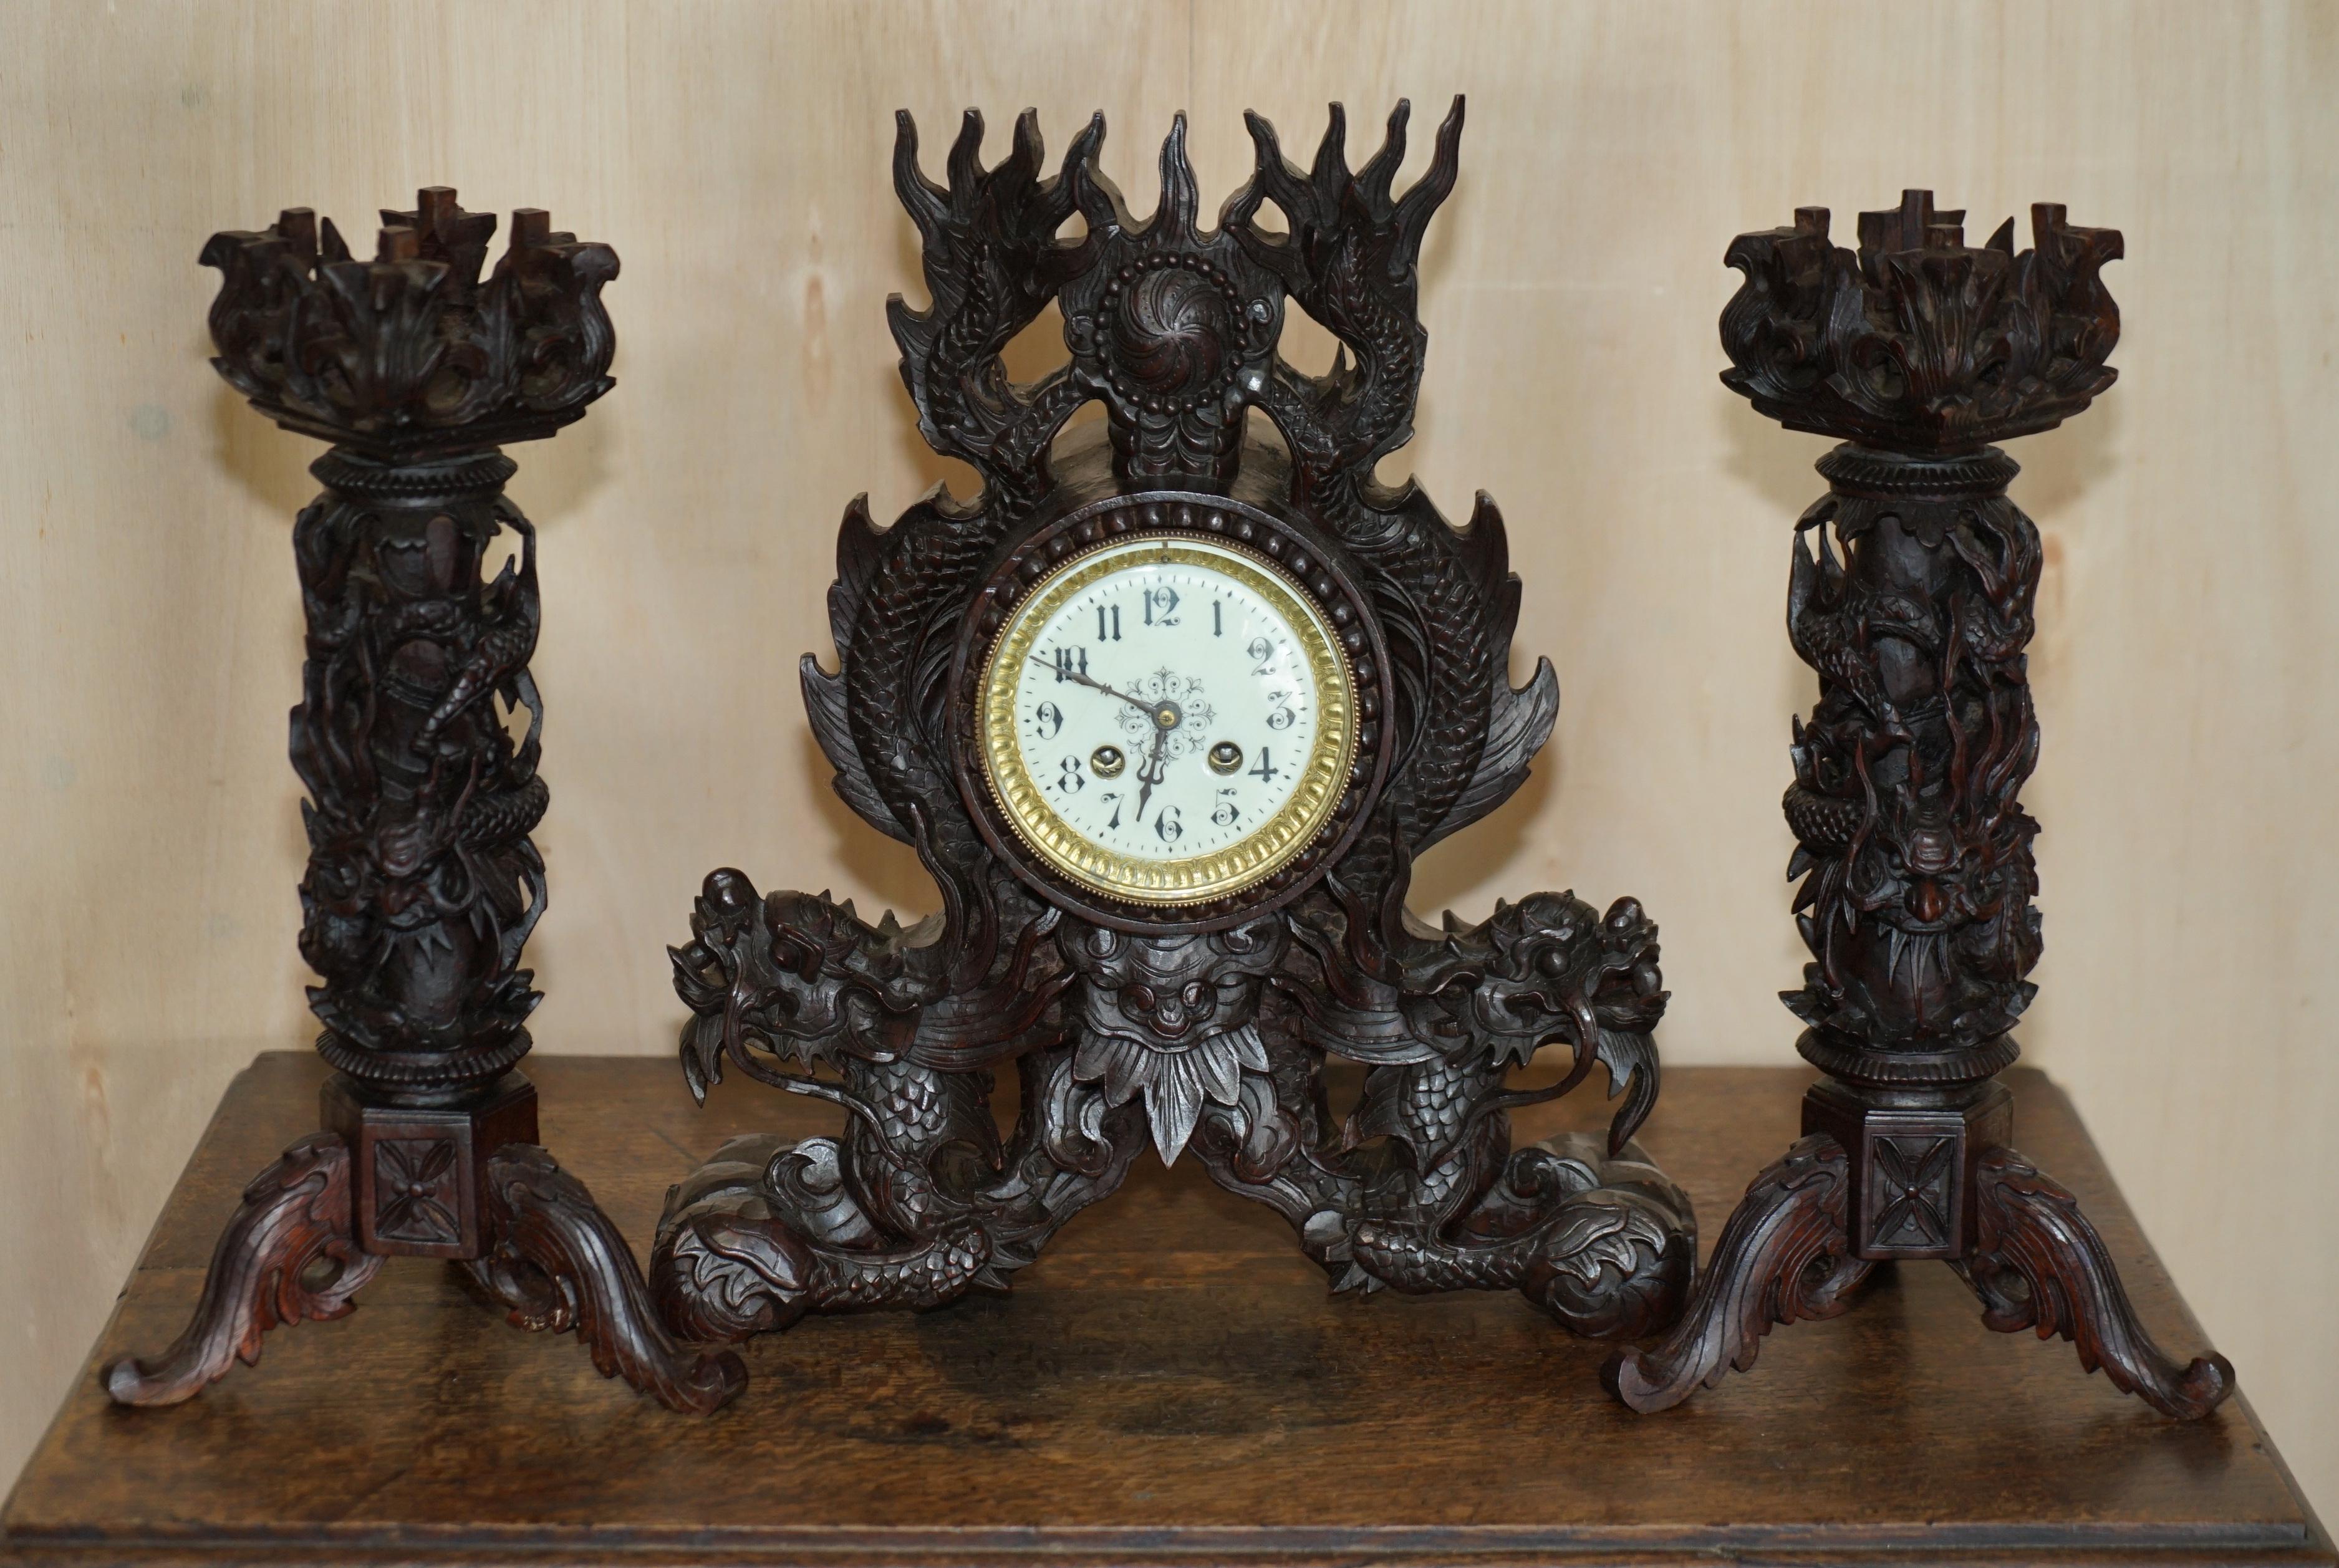 Royal House Antiques

Royal House Antiques is delighted to offer for sale this stunning circa 1880-1920 Chinese Export hand carved dragon mantle clock with matching candlesticks

A good looking and expertly carved suite, I have not seen another